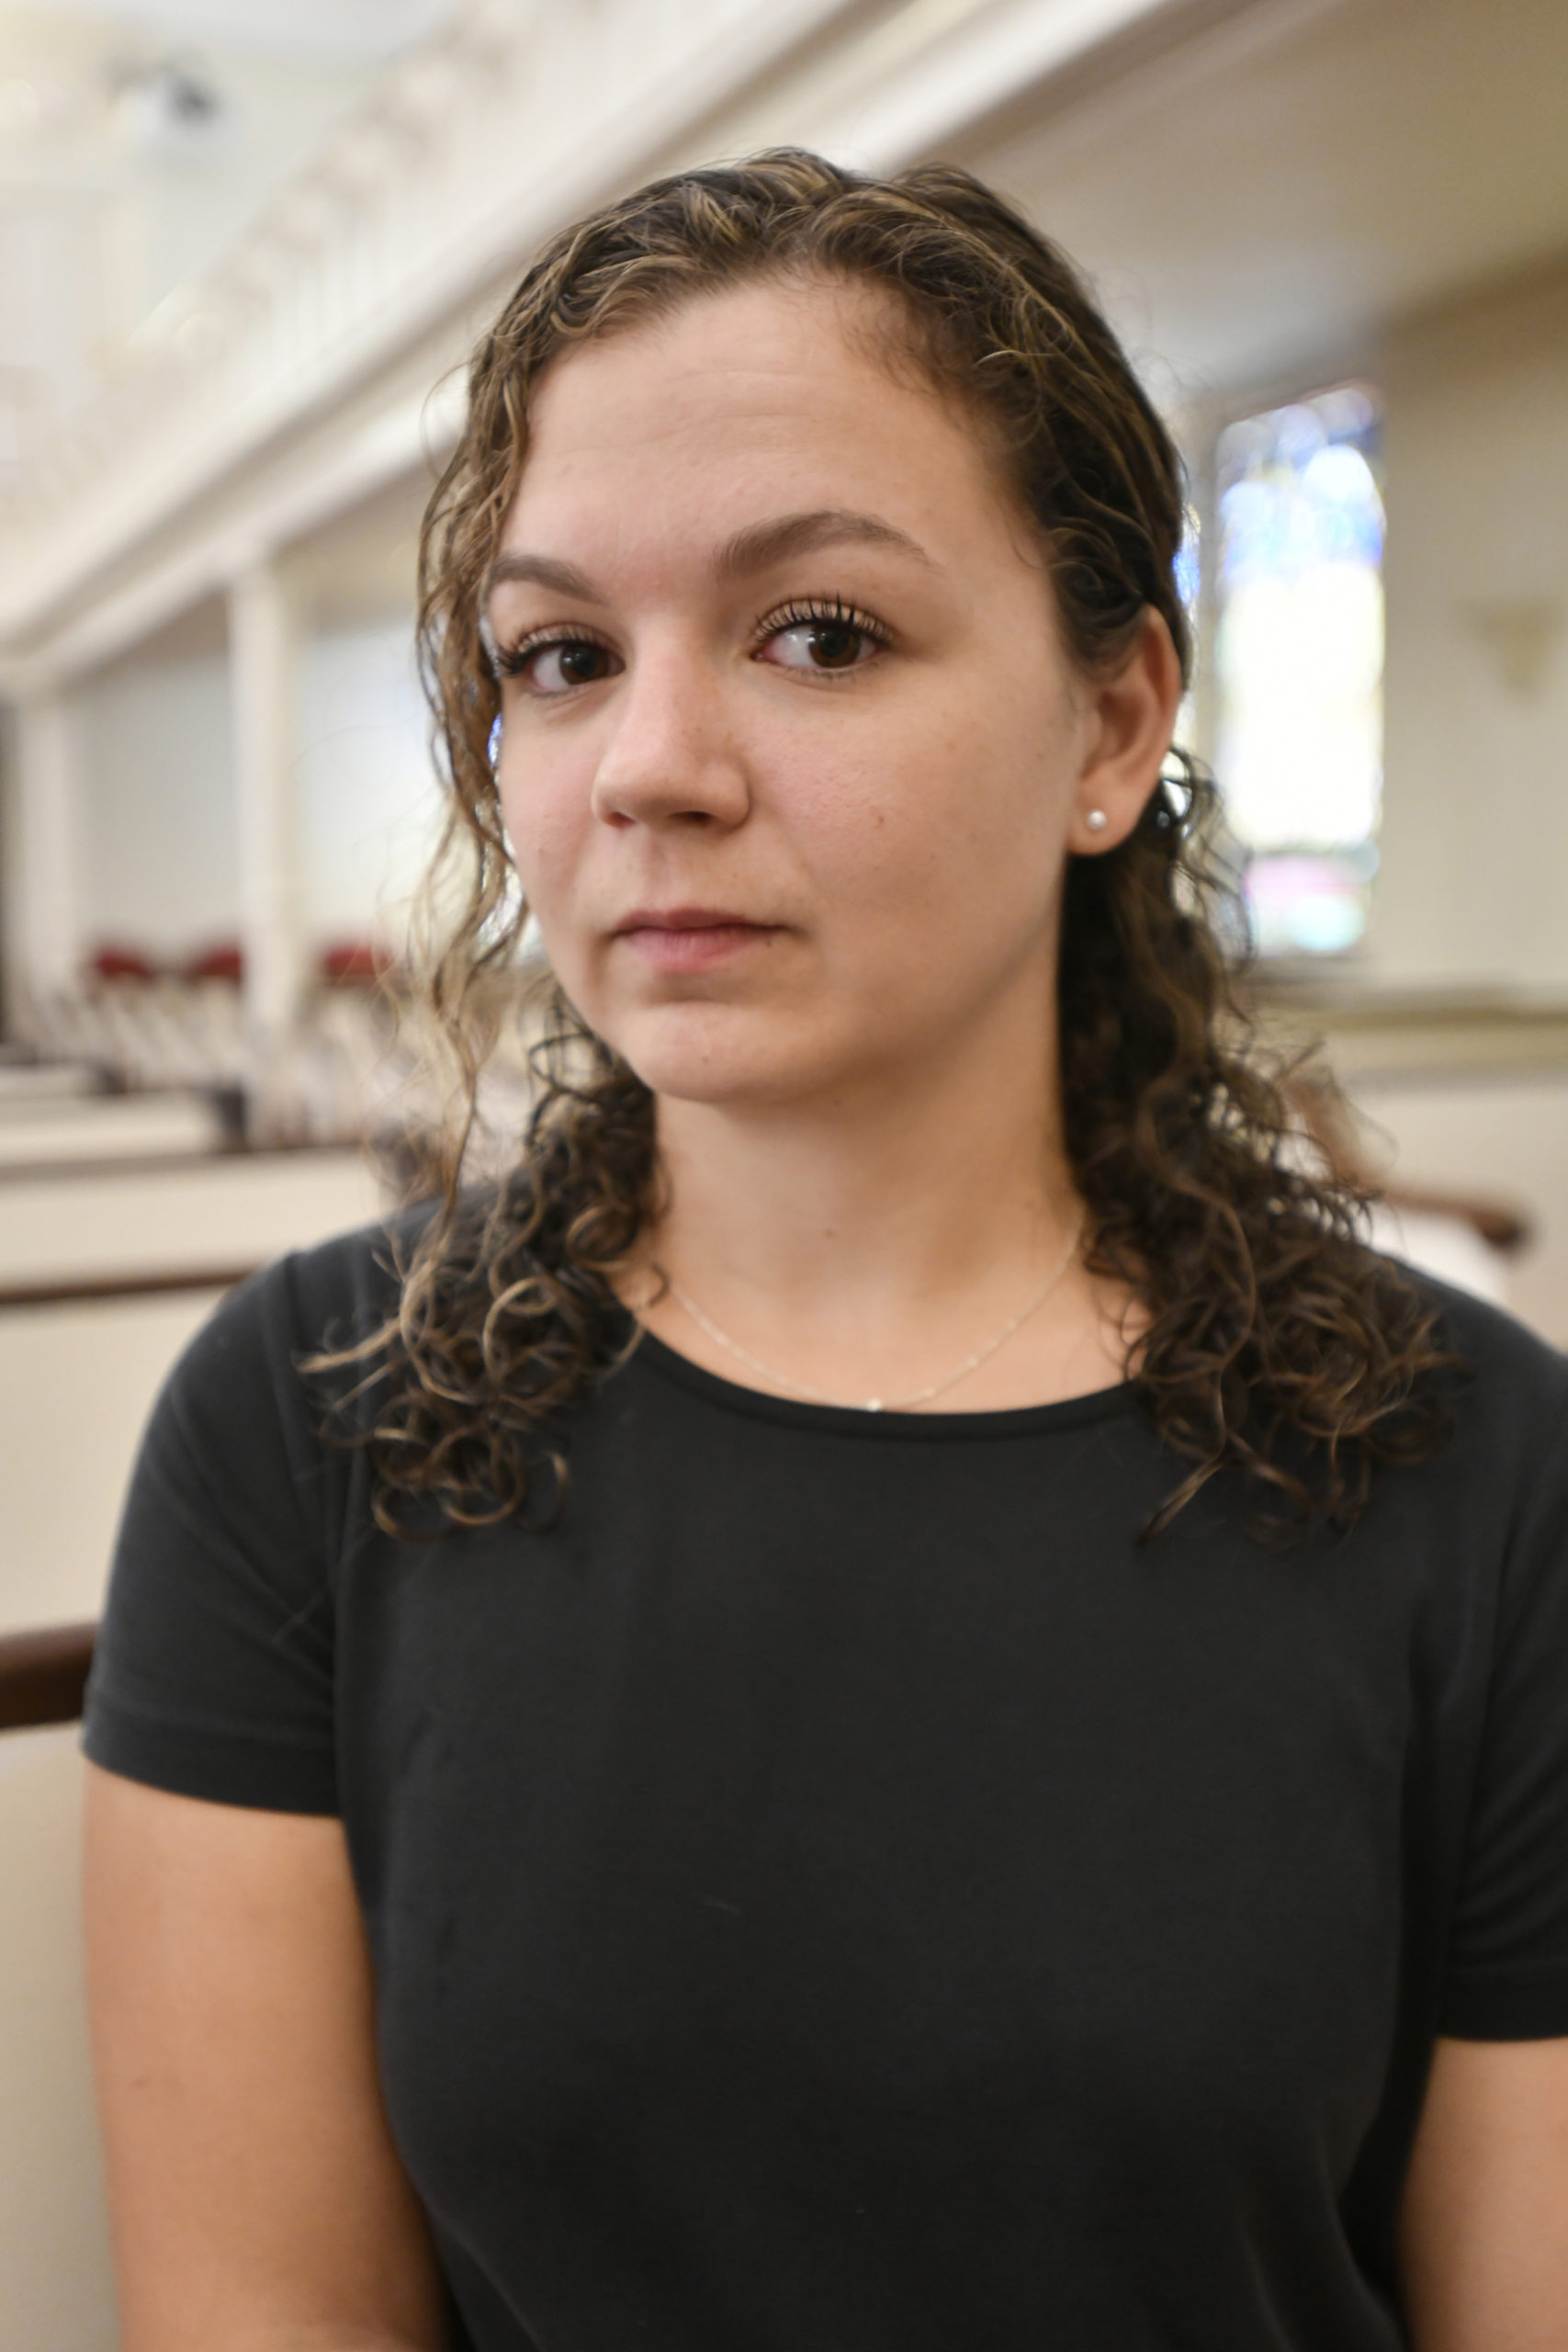 Casey Lockard, now 26, at the First Presbyterian Church in Southampton on August 30.    DANA SHAW